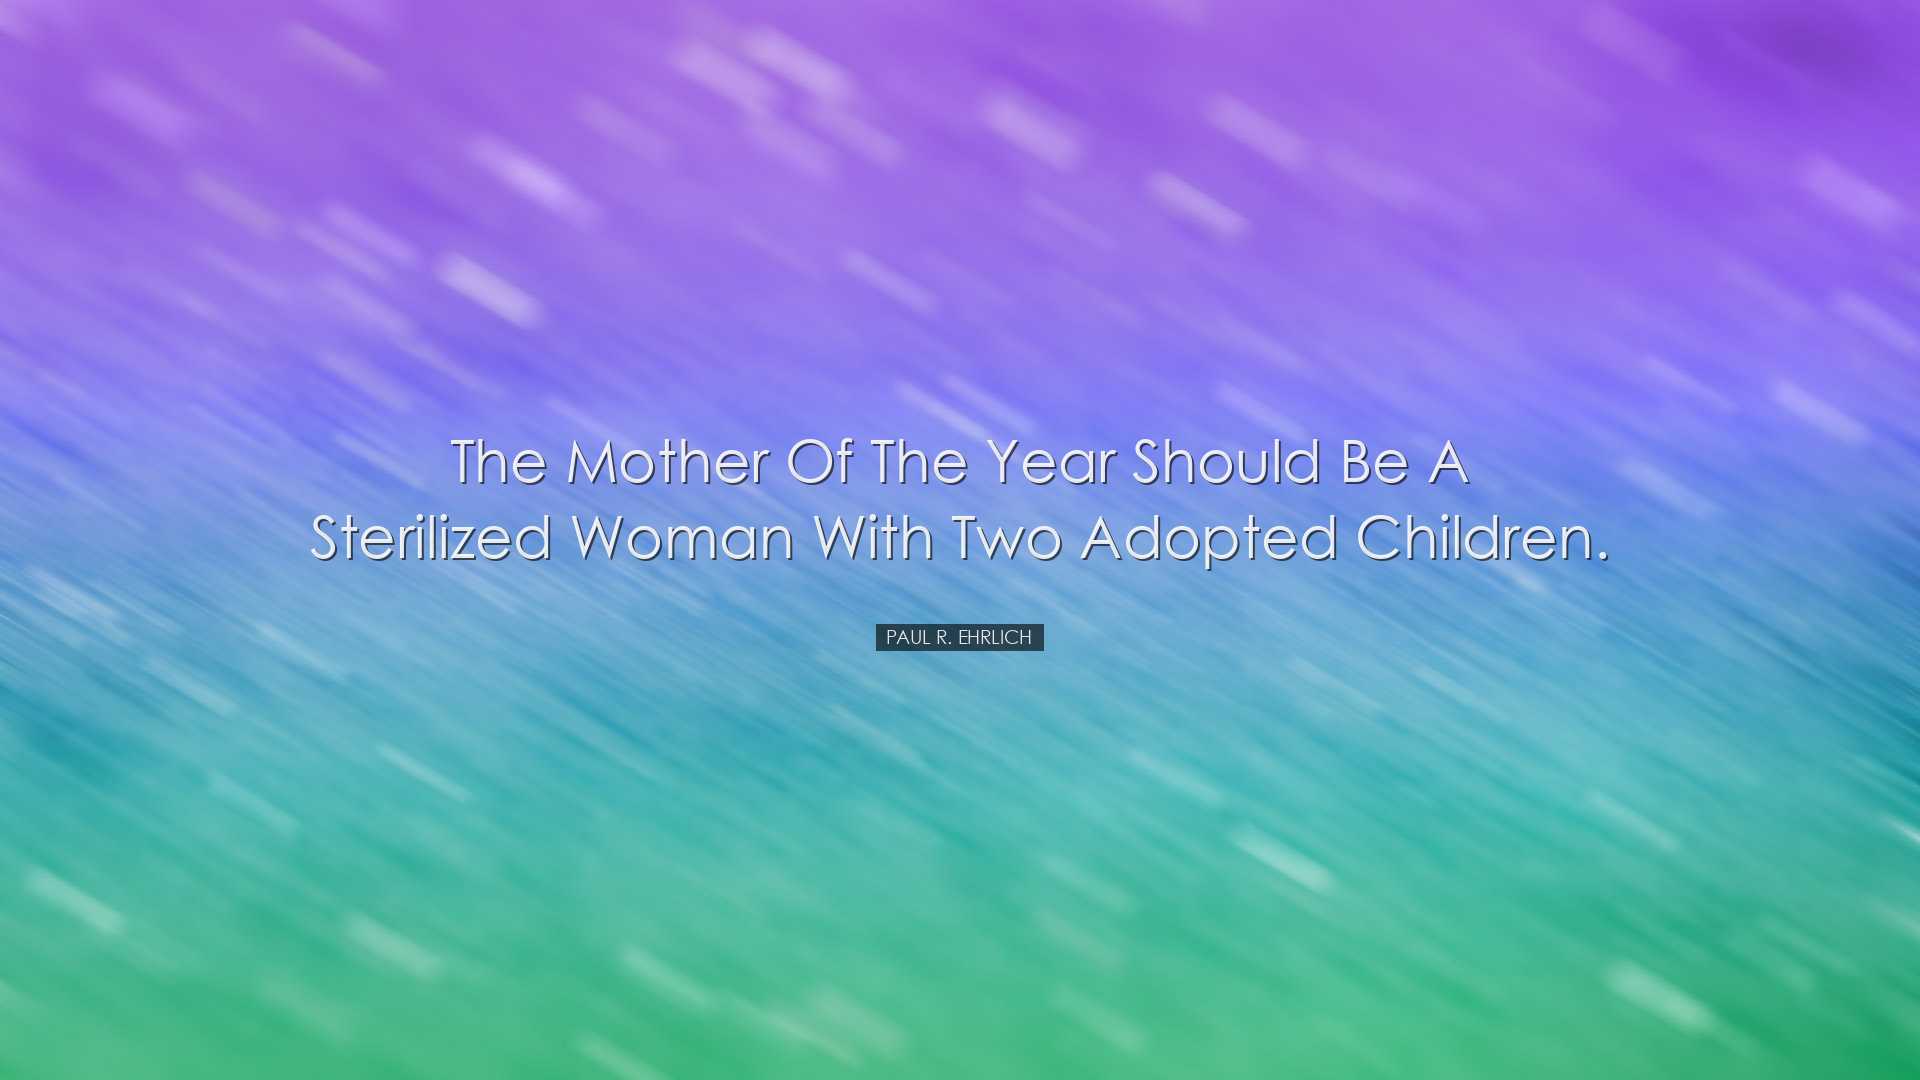 The mother of the year should be a sterilized woman with two adopt